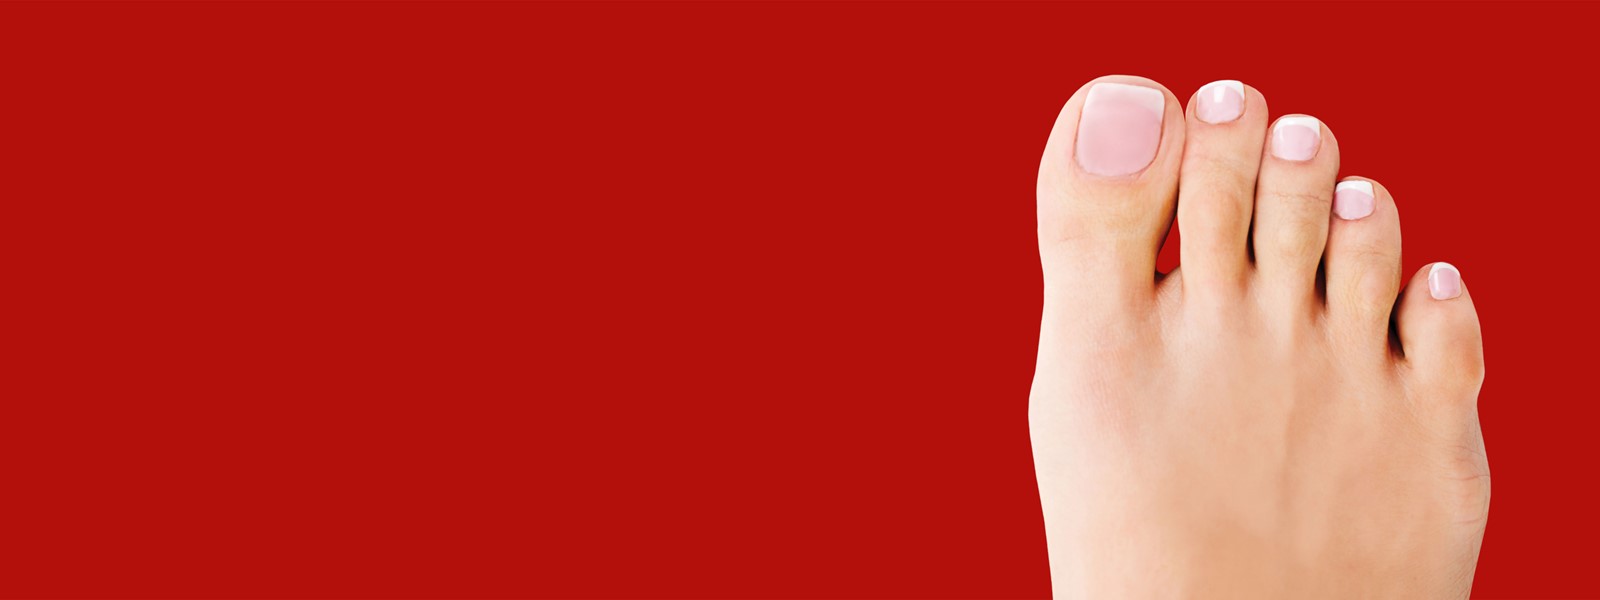 Header photo with a bare foot and a red background